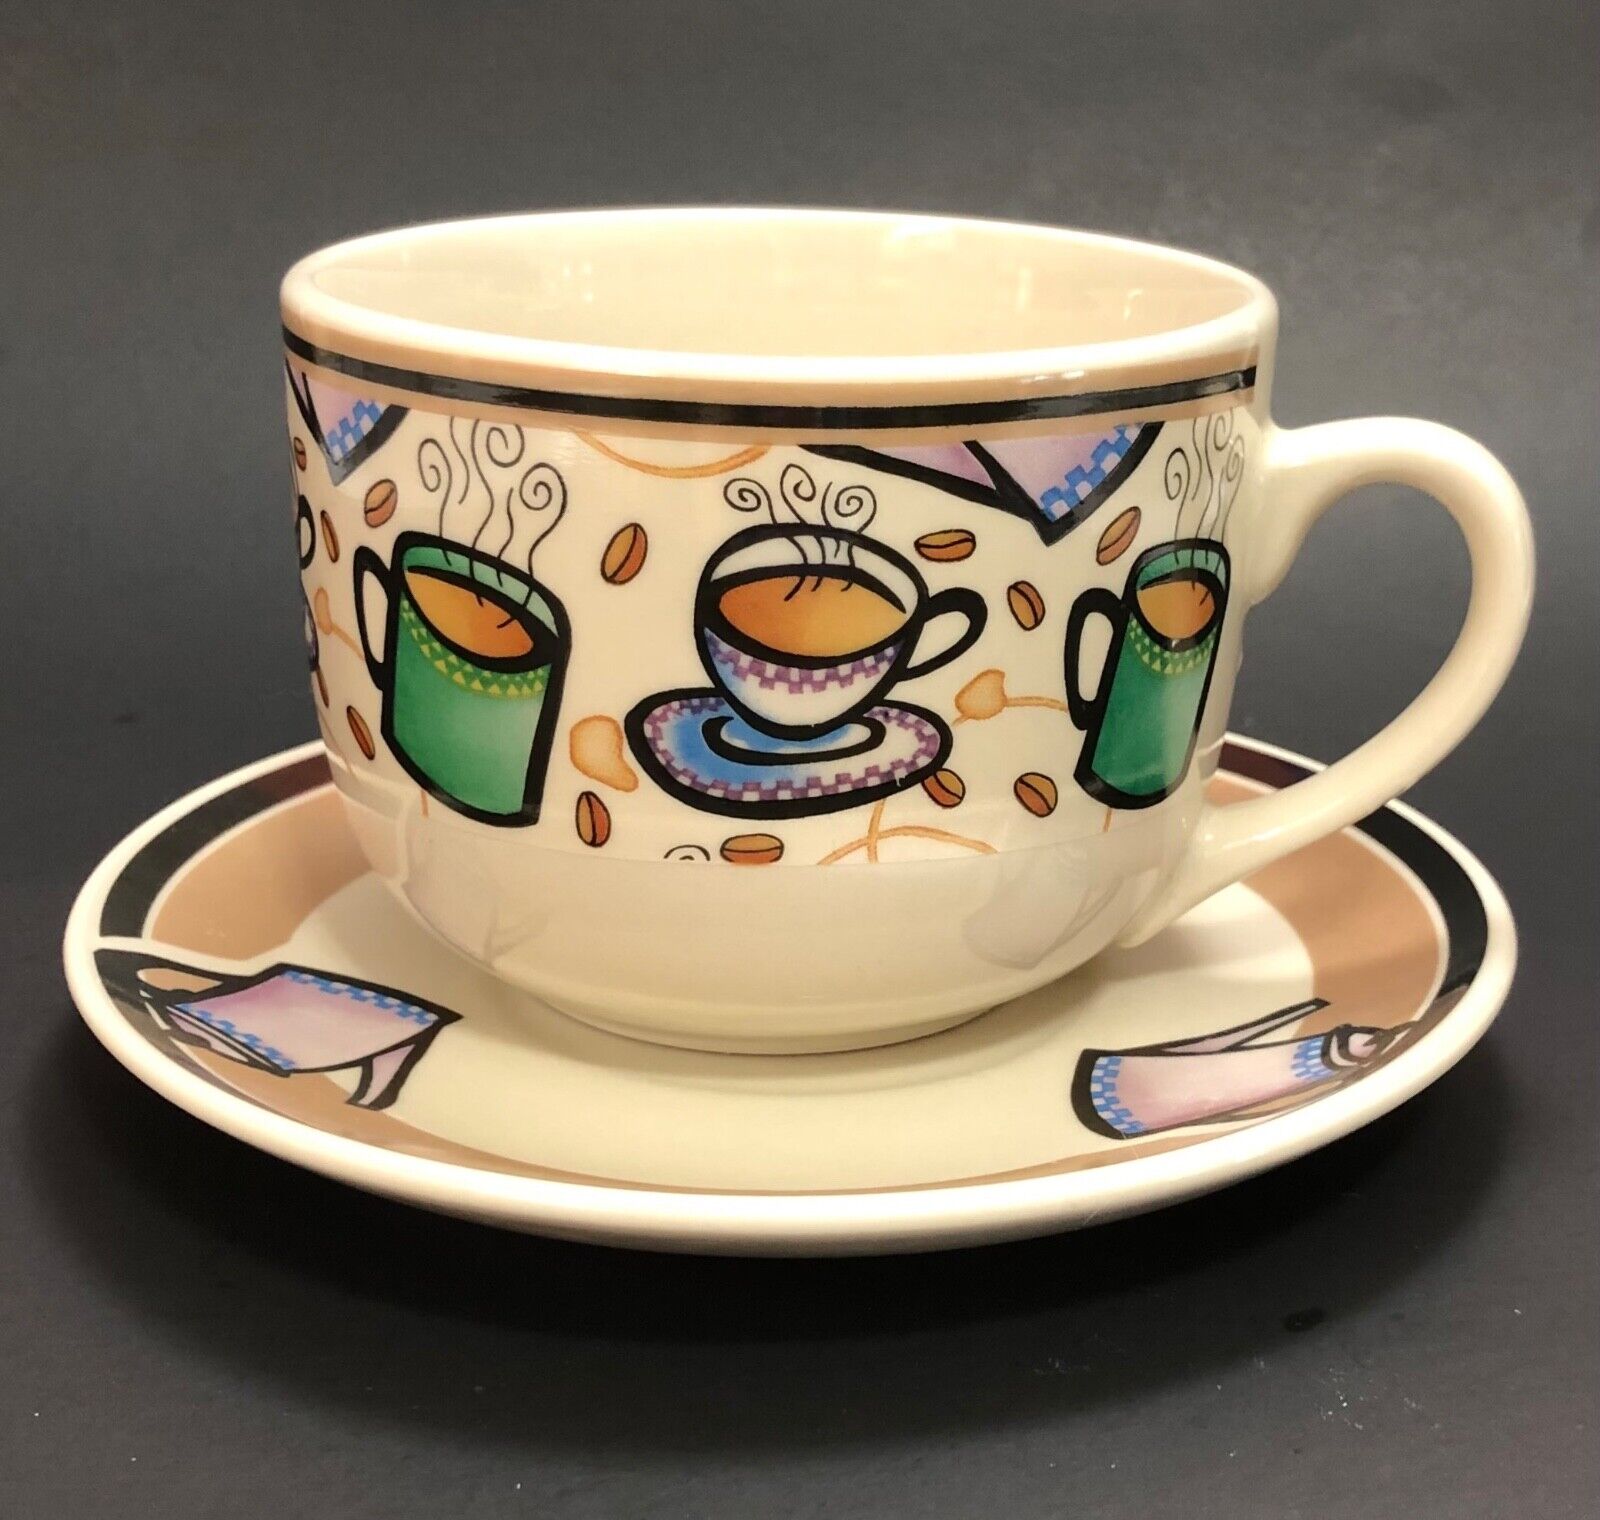 California Pantry Vintage Cup and Saucer 1999 Cappuccino Bistro Motif OverSized